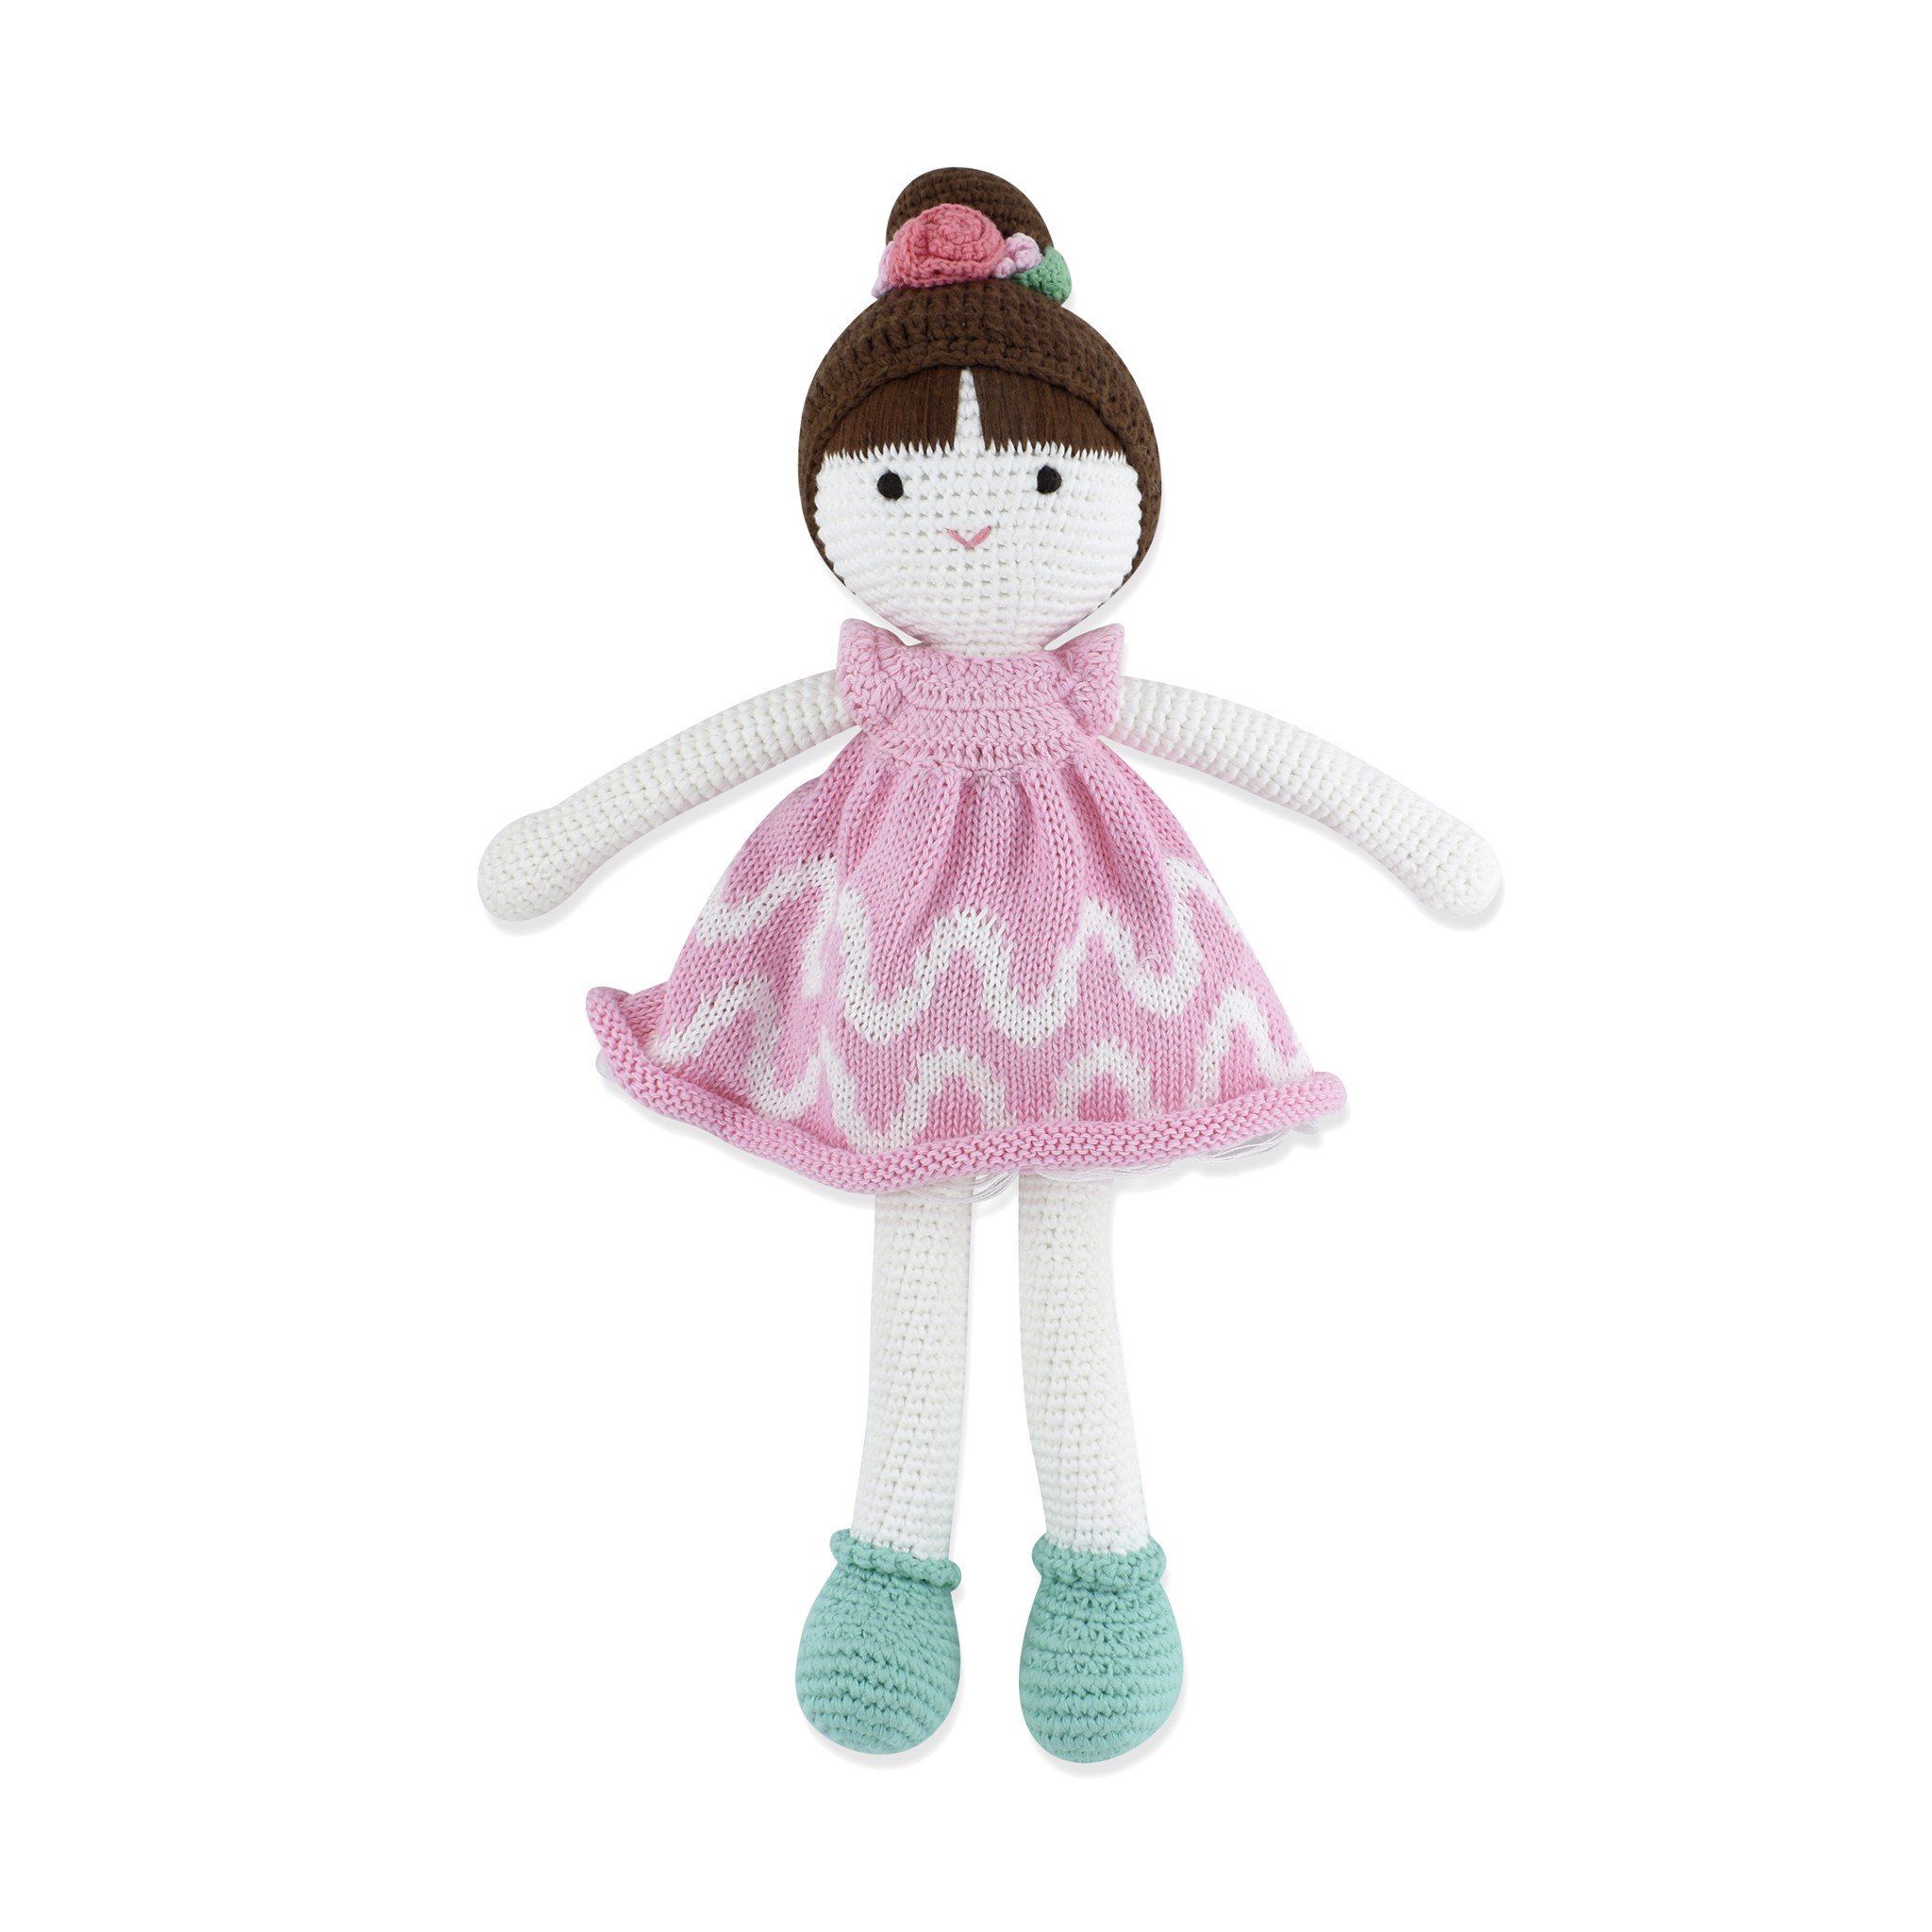  Doll - Lily 